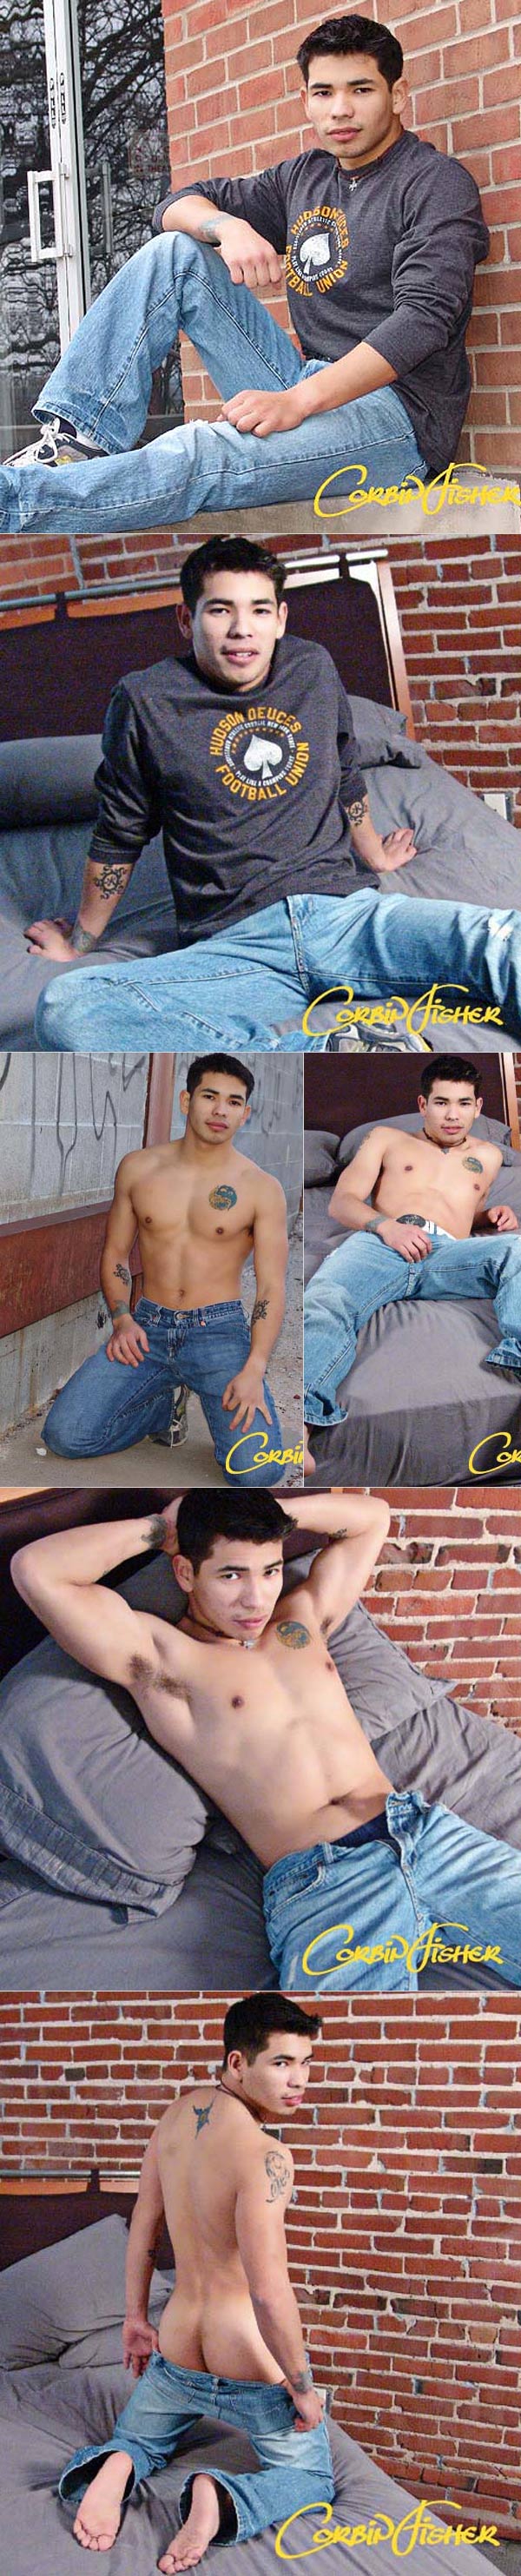 Enrique's Audition at CorbinFisher